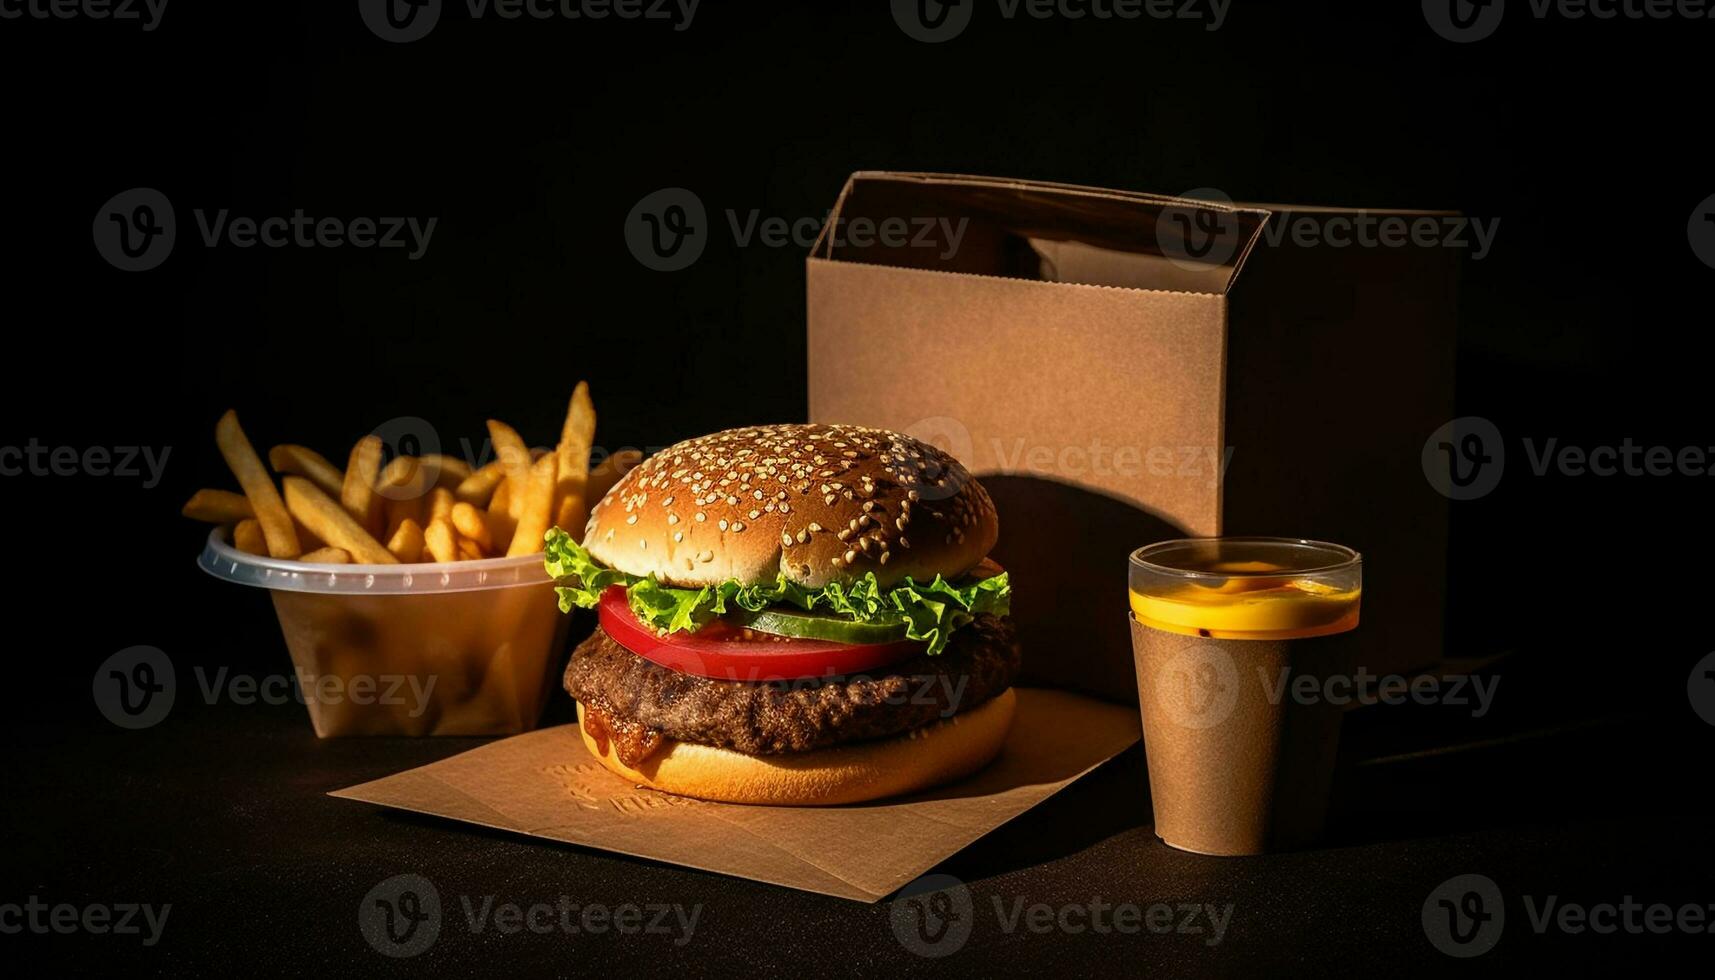 Grilled cheeseburger and fries, a classic meal generated by AI photo